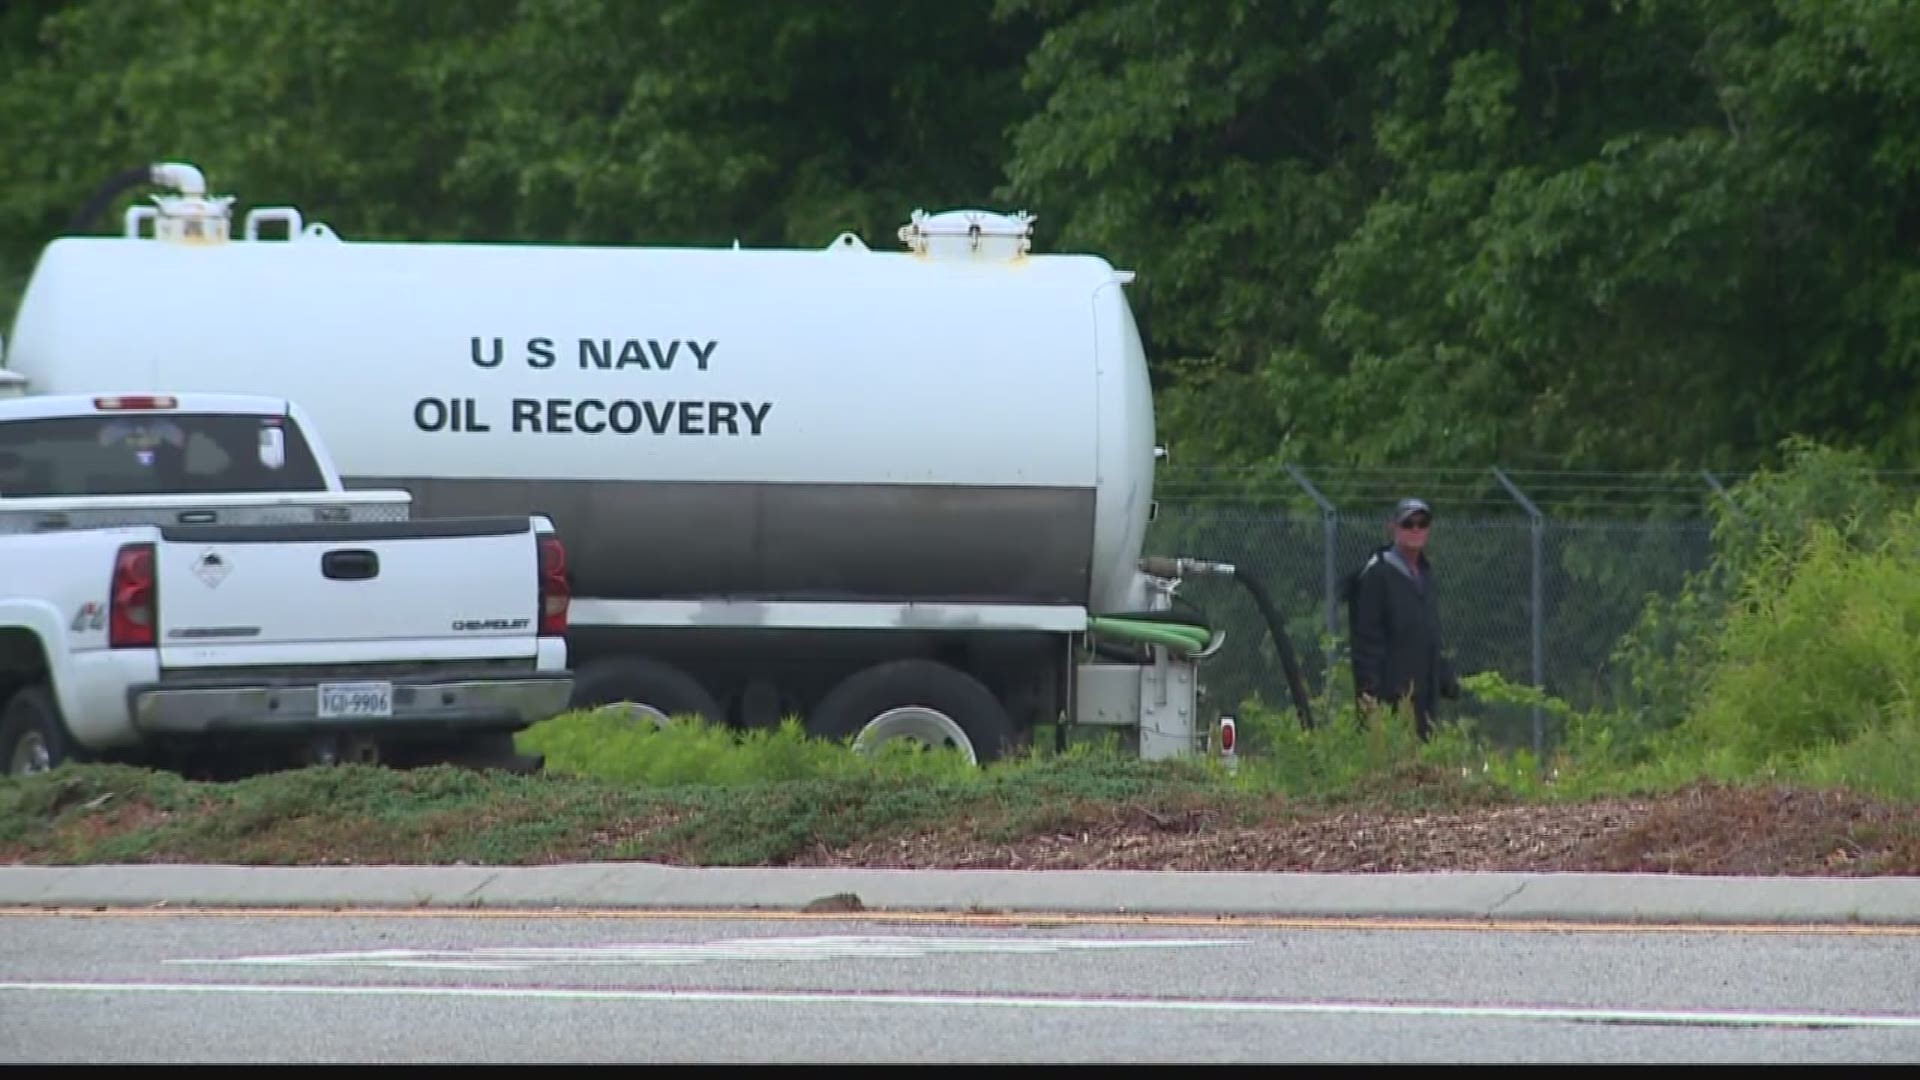 The Navy updated people on the clean-up of tens of thousands of jet fuel that spilled at Naval Air Station Oceana on May 11, 2017.